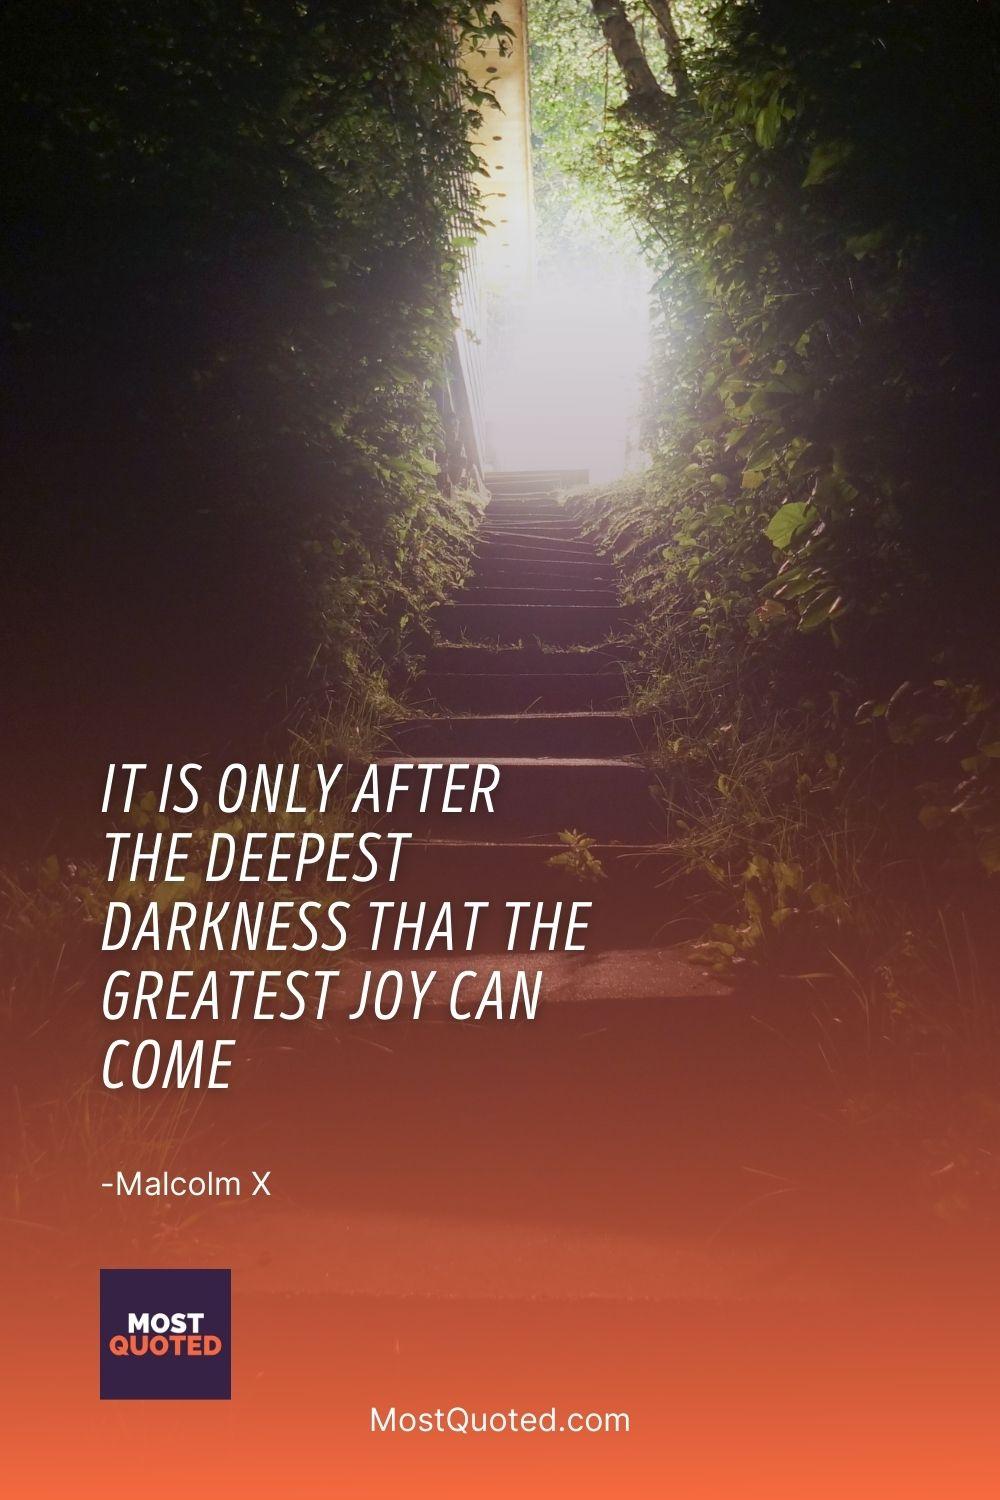 It is only after the deepest darkness that the greatest joy can come - Malcolm X